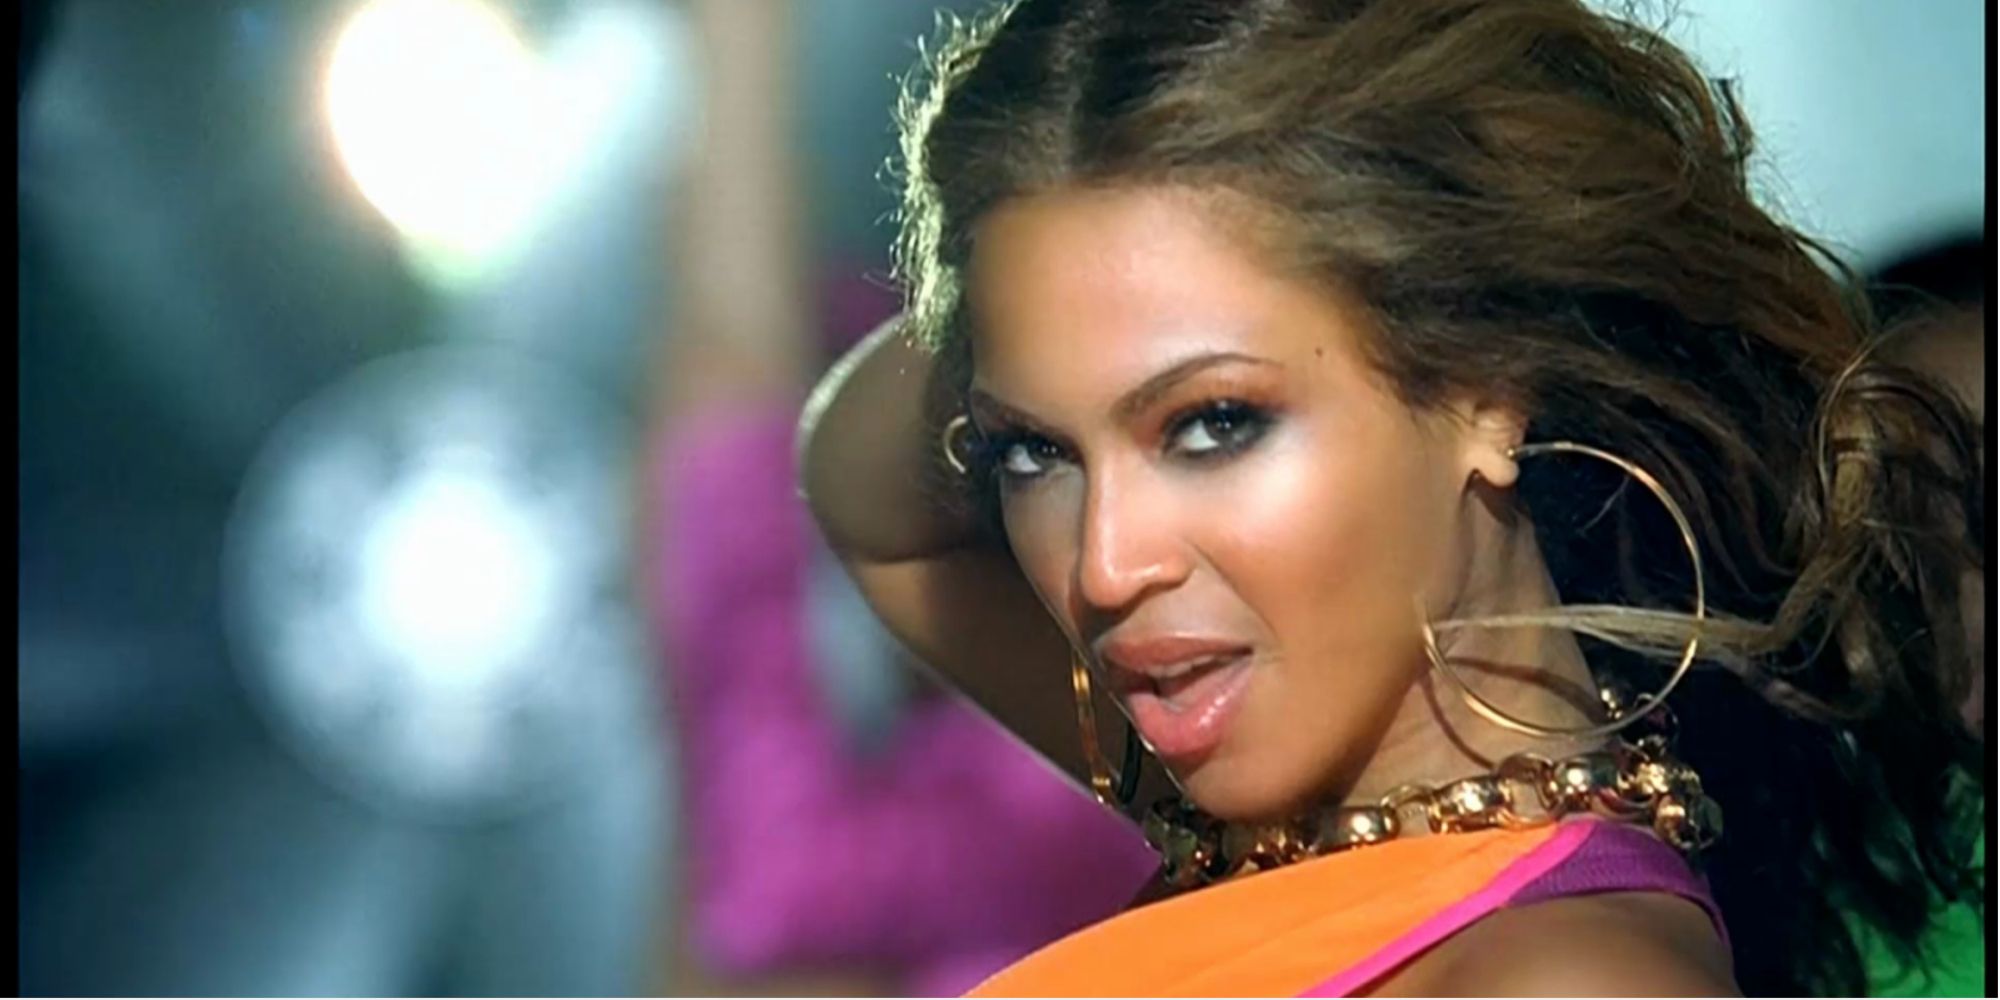 Beyoncé in the Crazy in Love video